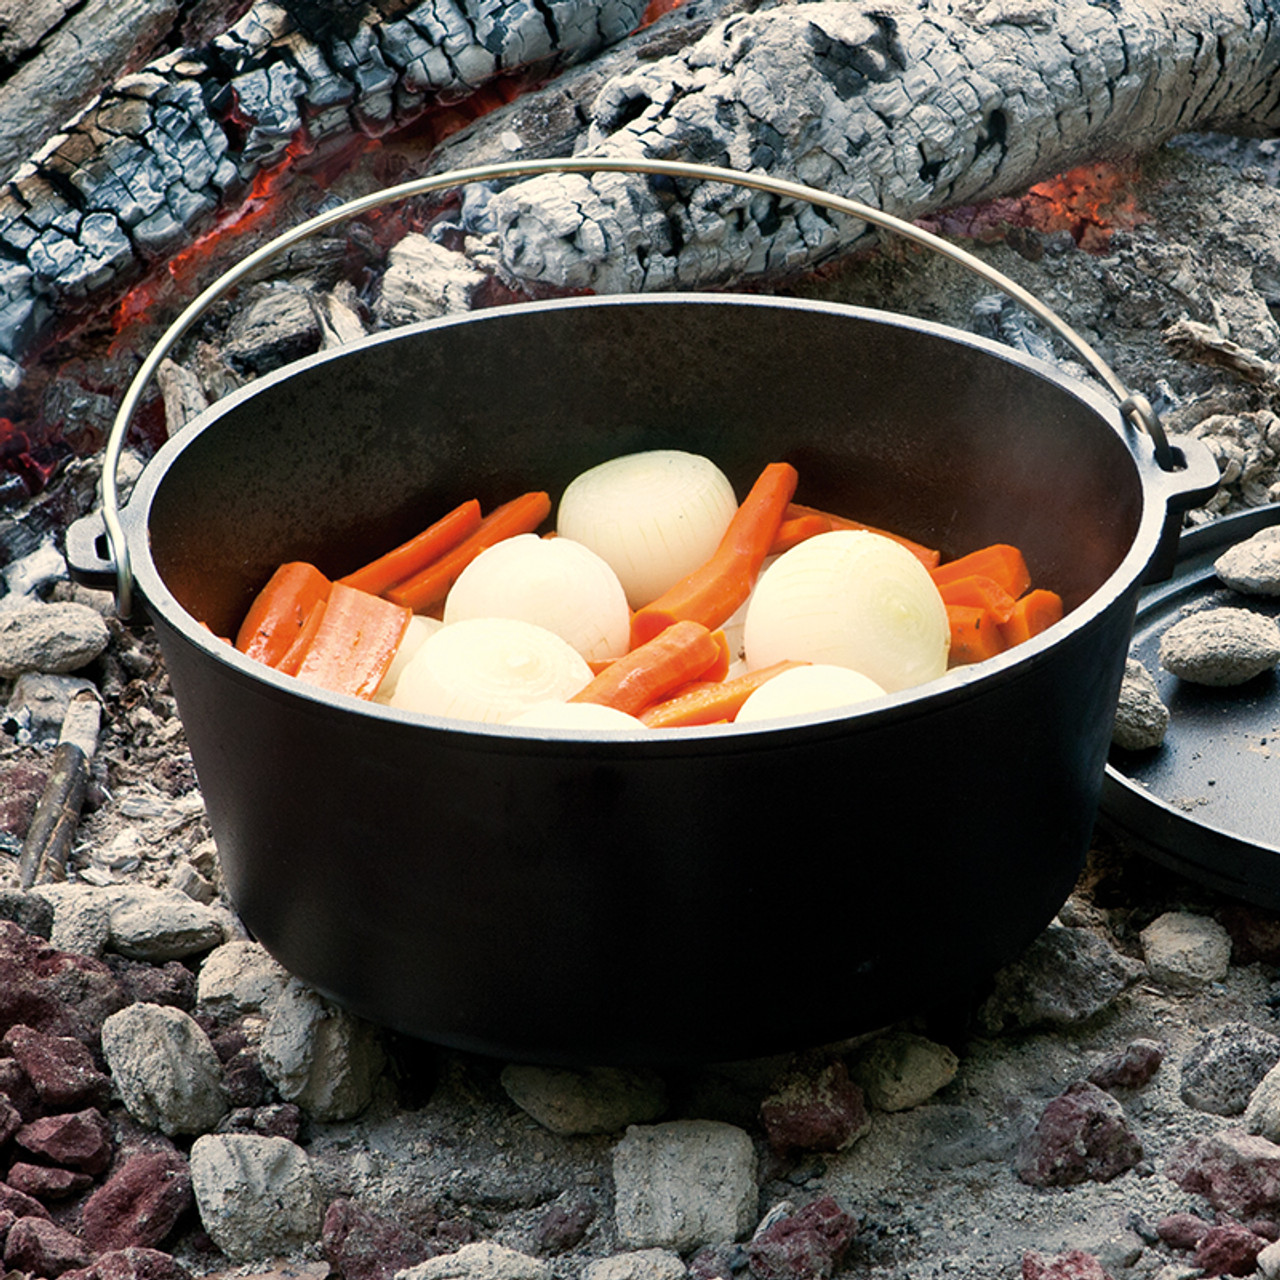 Lodge 12 in. Aluminum Foil Camp Dutch Oven Liners (12-Pack)